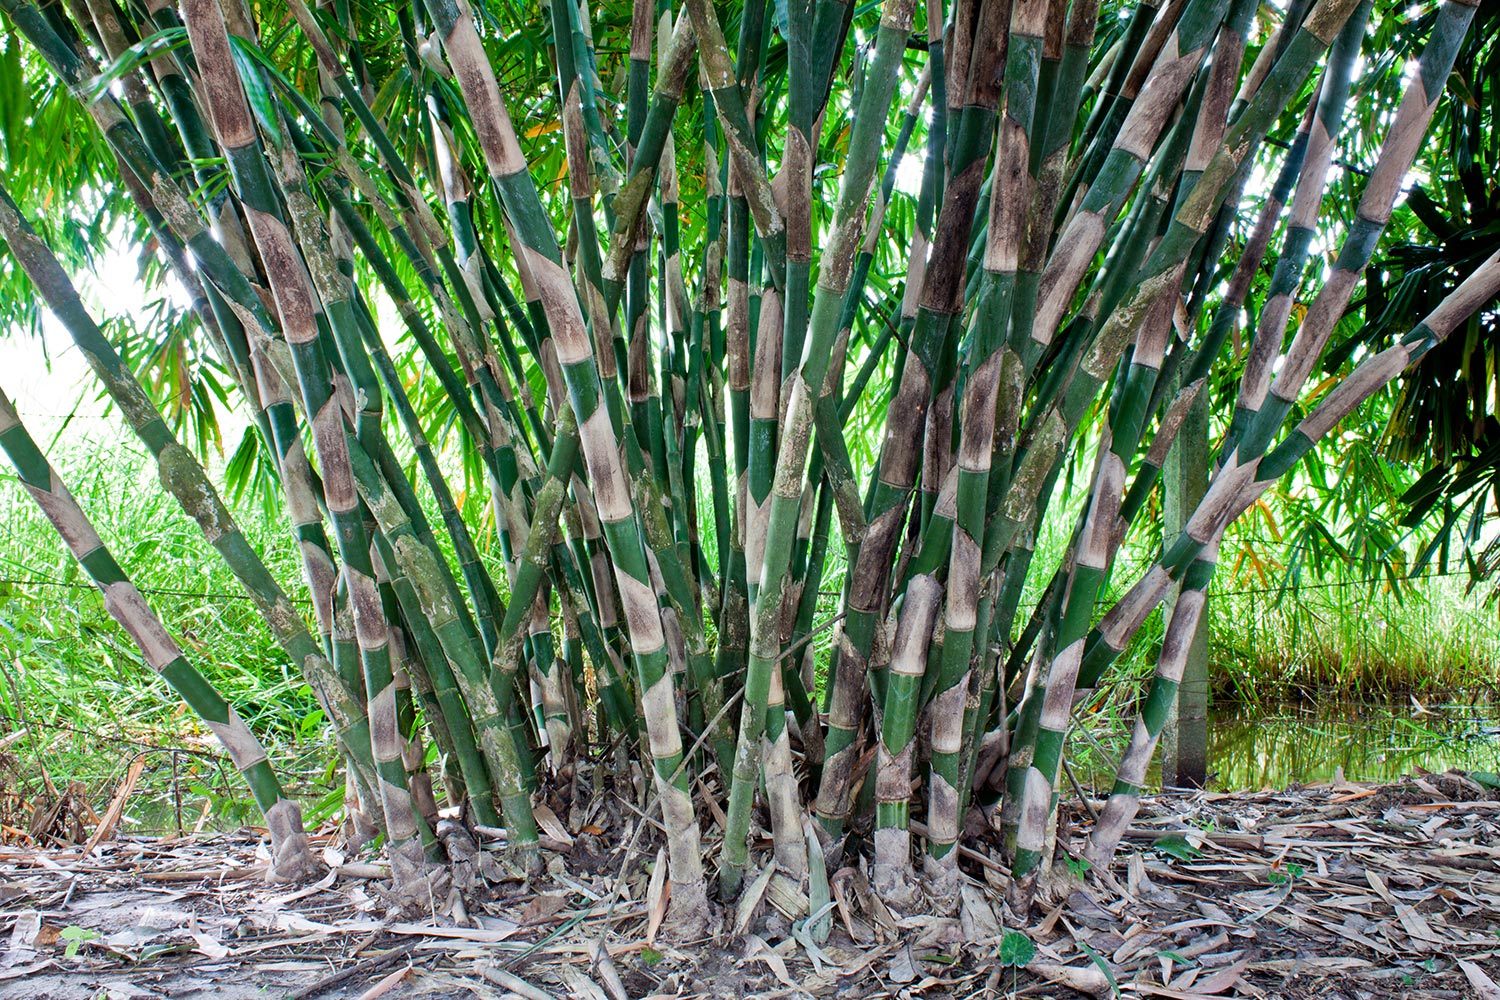 The clump of bamboo tree